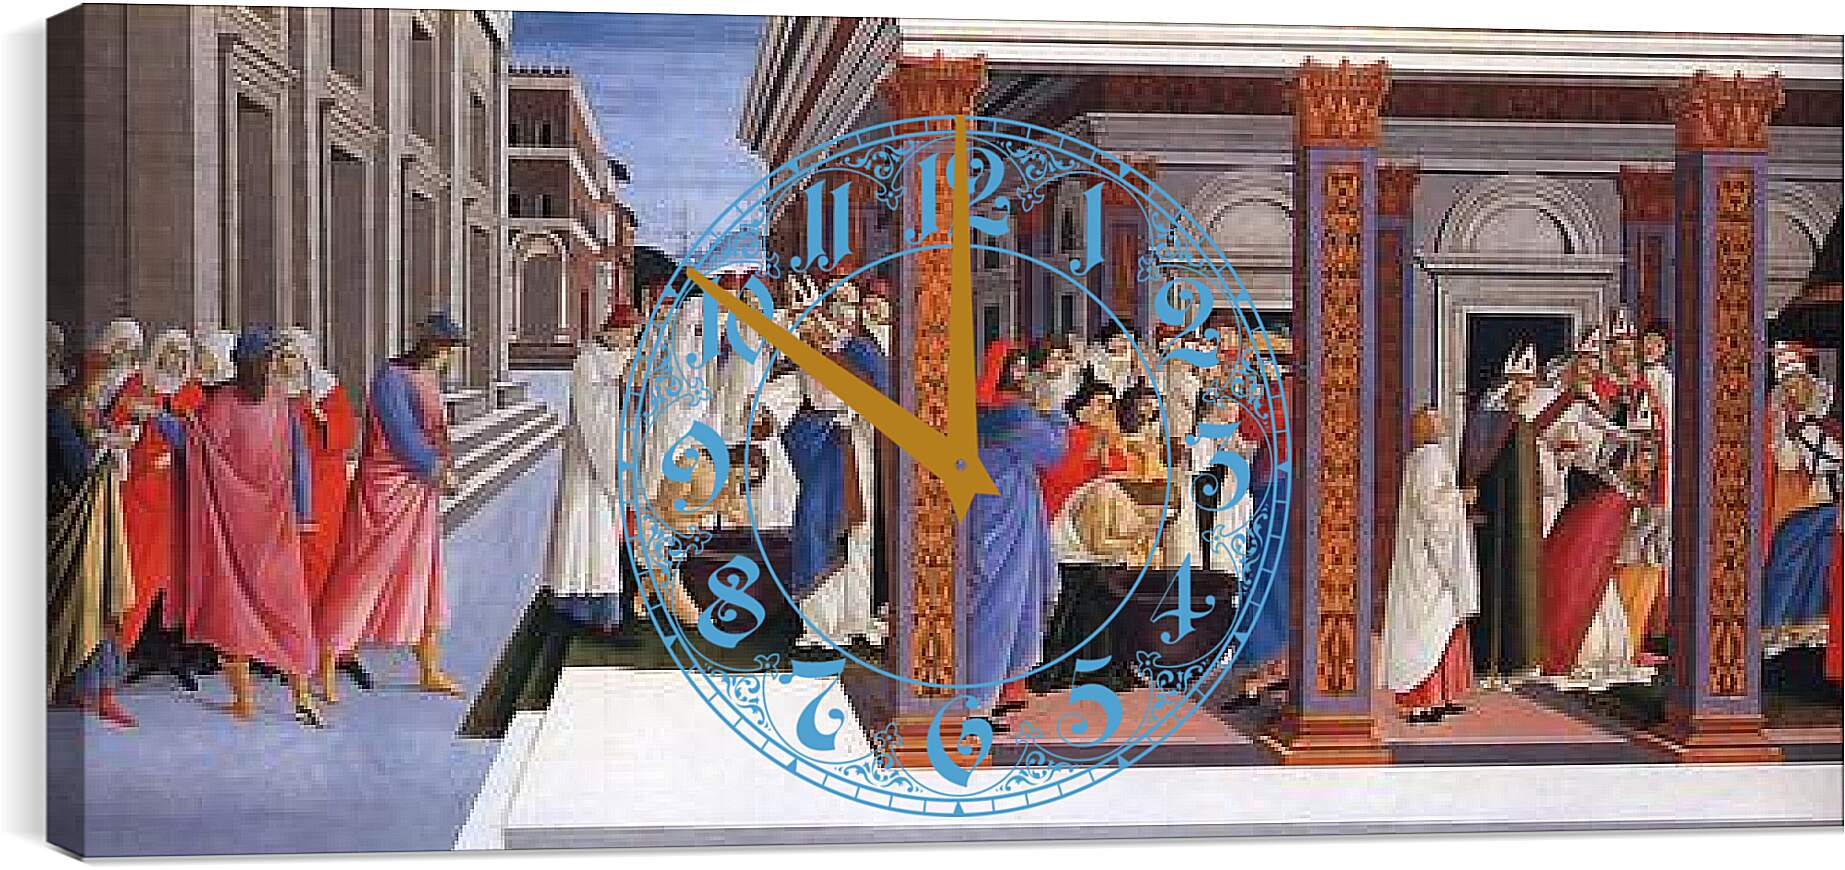 Часы картина - Baptism of St. Zenobius and His Appointment as a Bishop. Сандро Боттичелли